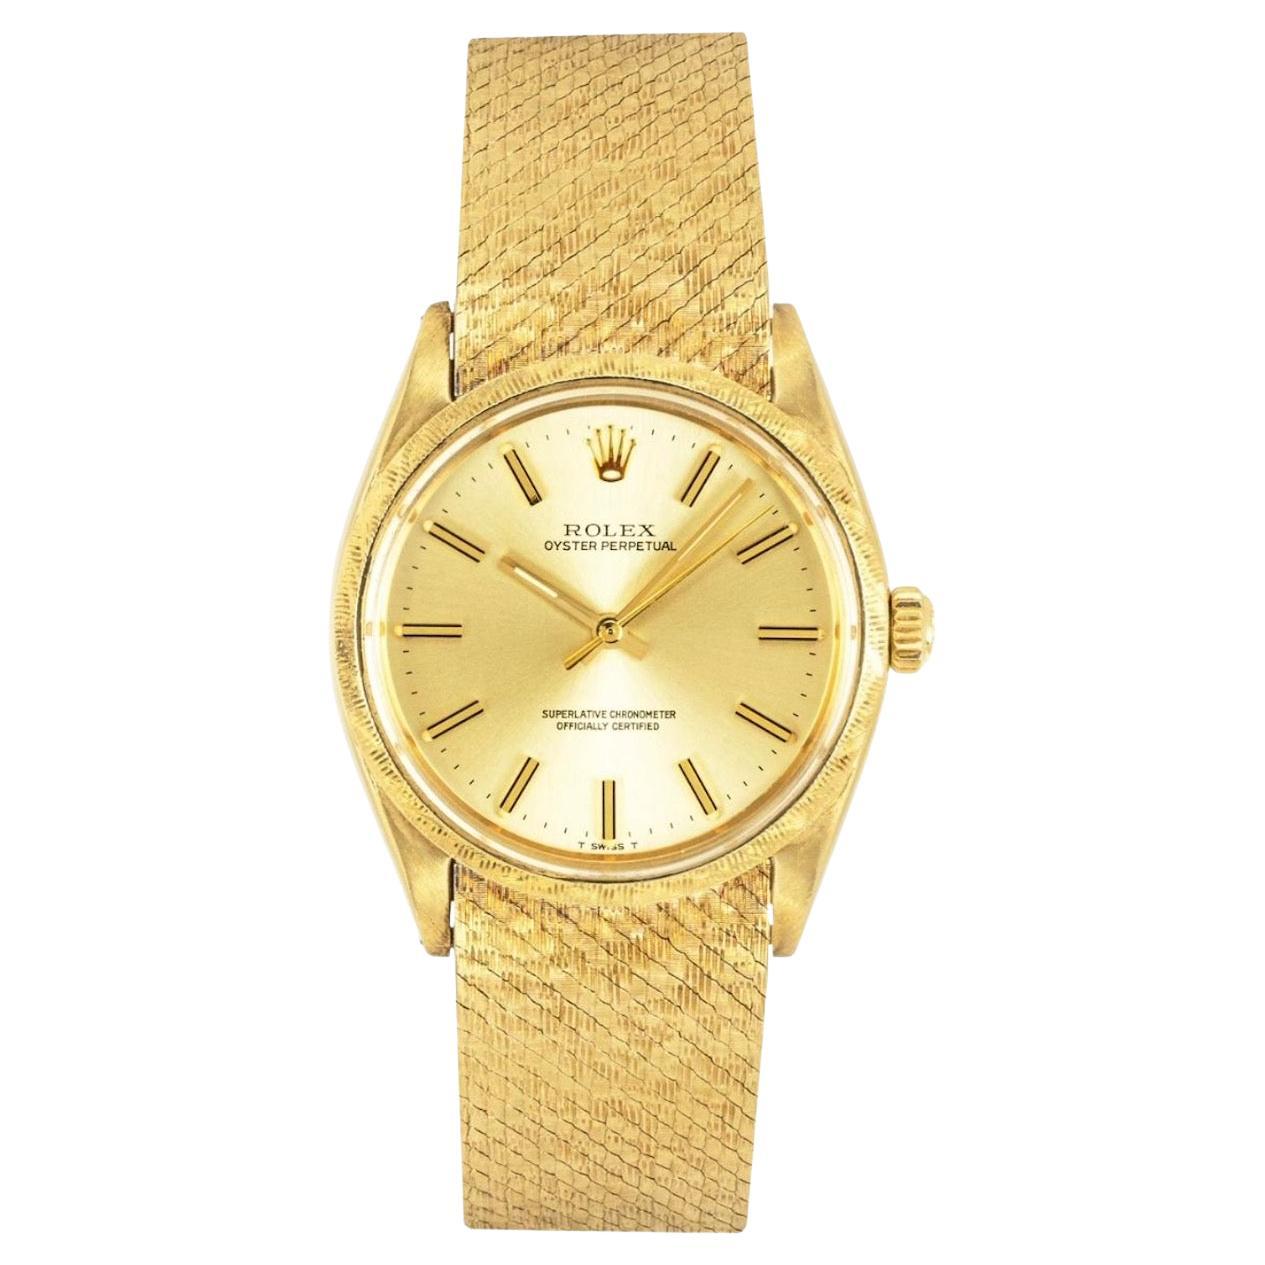 Rolex Rare Vintage Oyster Perpetual Yellow Gold 1035